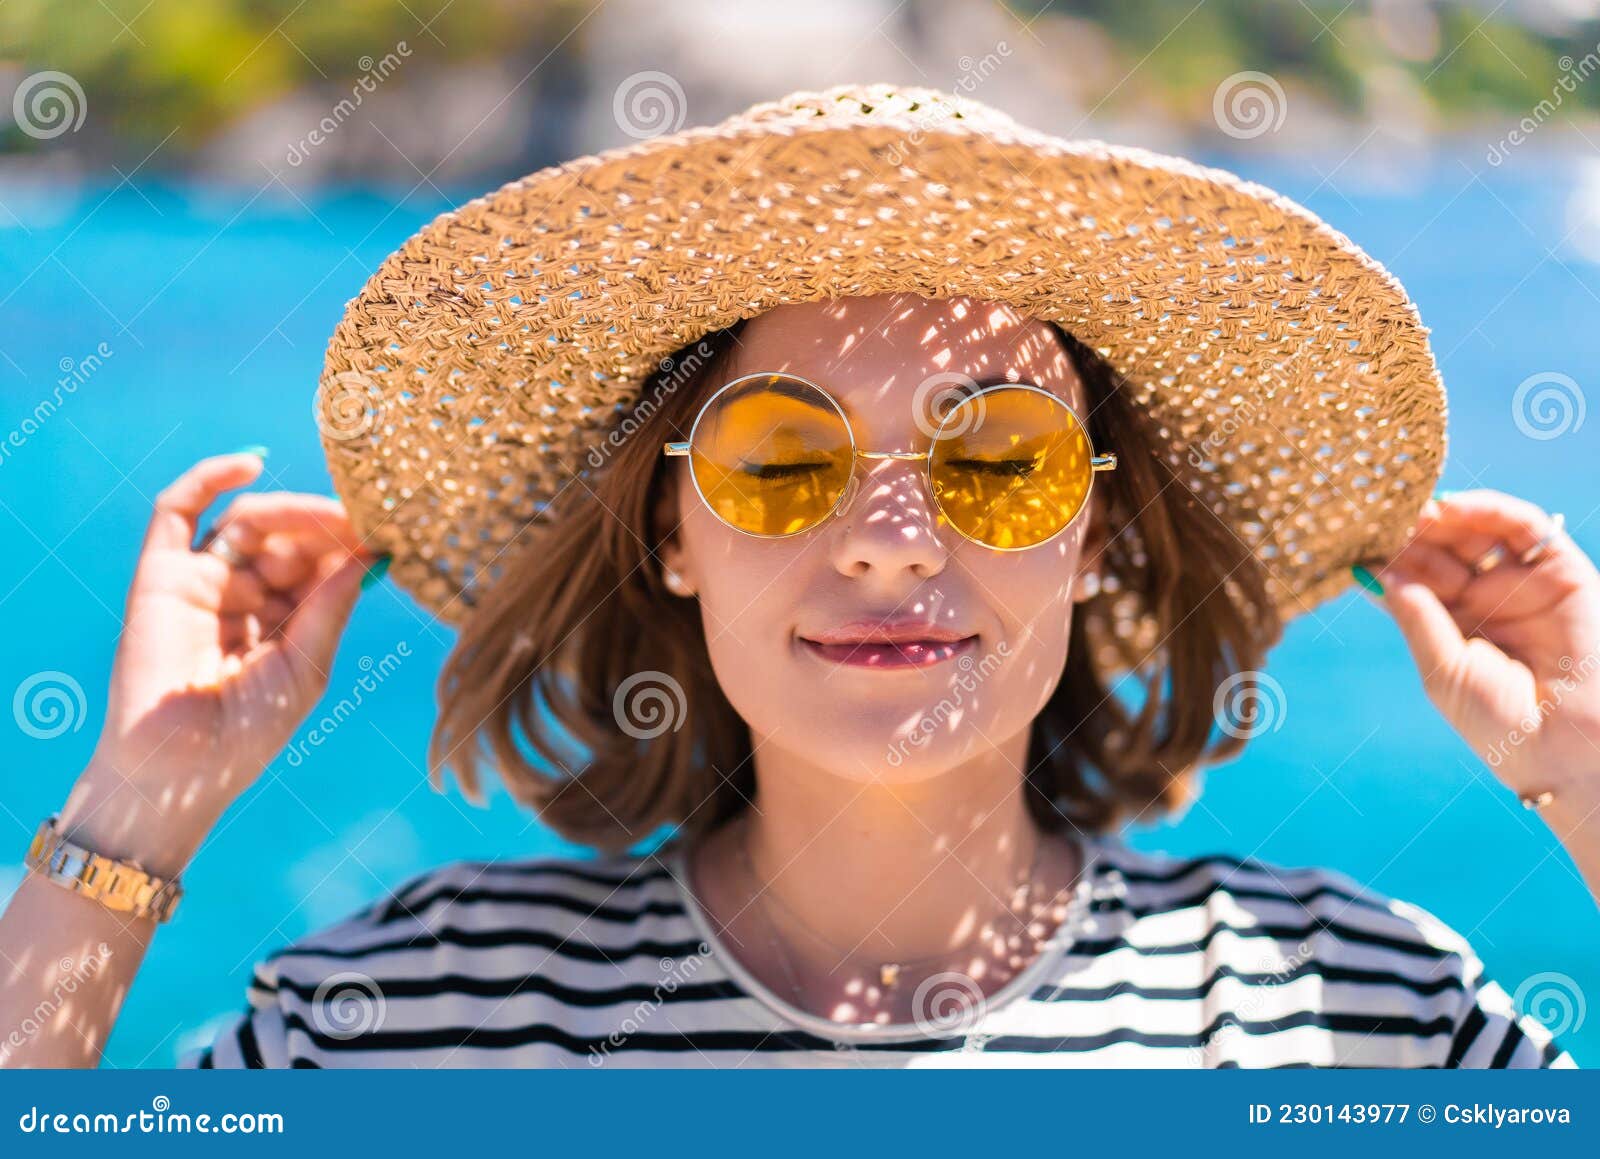 Pretty Woman In Yellow Sunglasses And Straw Hat Smiling Sincerely To Camera On Teal Blue Sea 